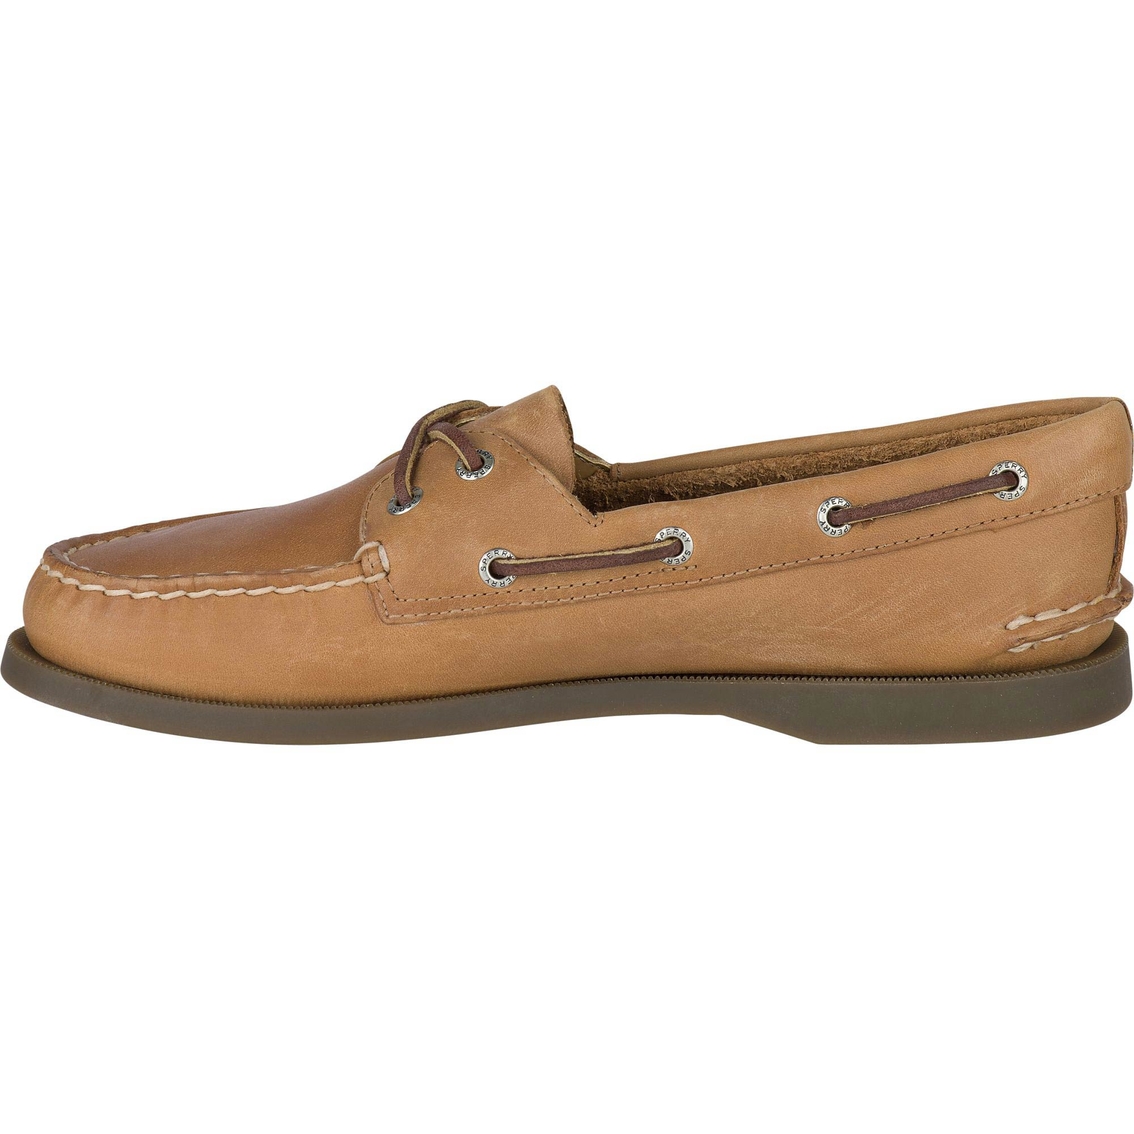 Sperry Authentic Original Two Eye Boat Shoes - Image 3 of 6